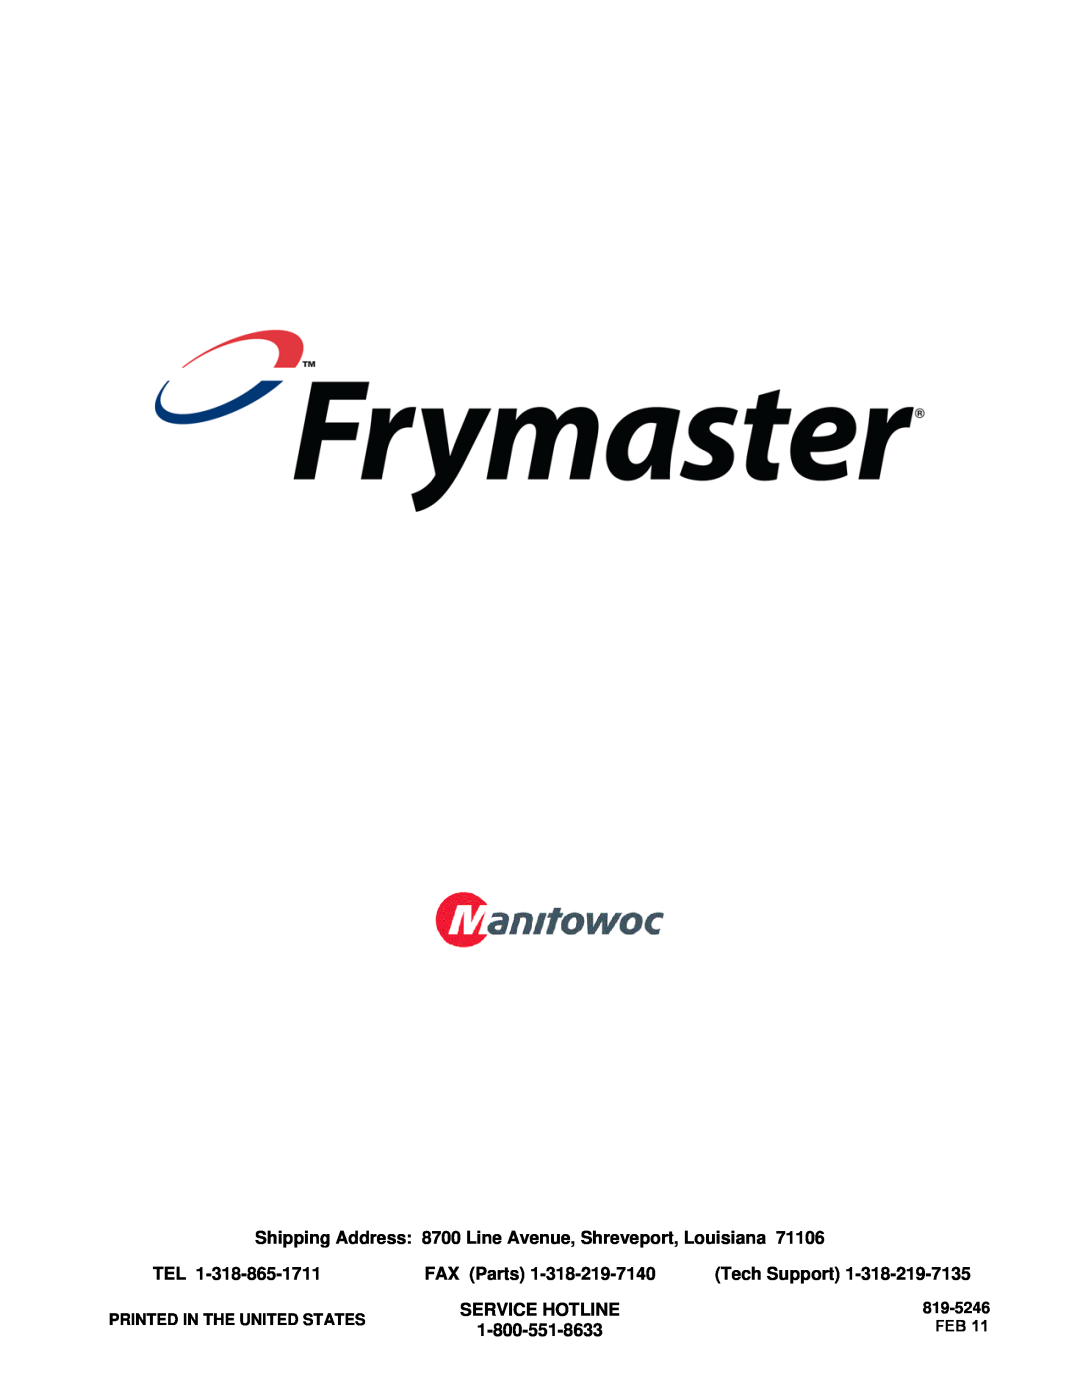 Frymaster 8SMS, 8BC, 8C Shipping Address 8700 Line Avenue, Shreveport, Louisiana, FAX Parts, Tech Support, Service Hotline 